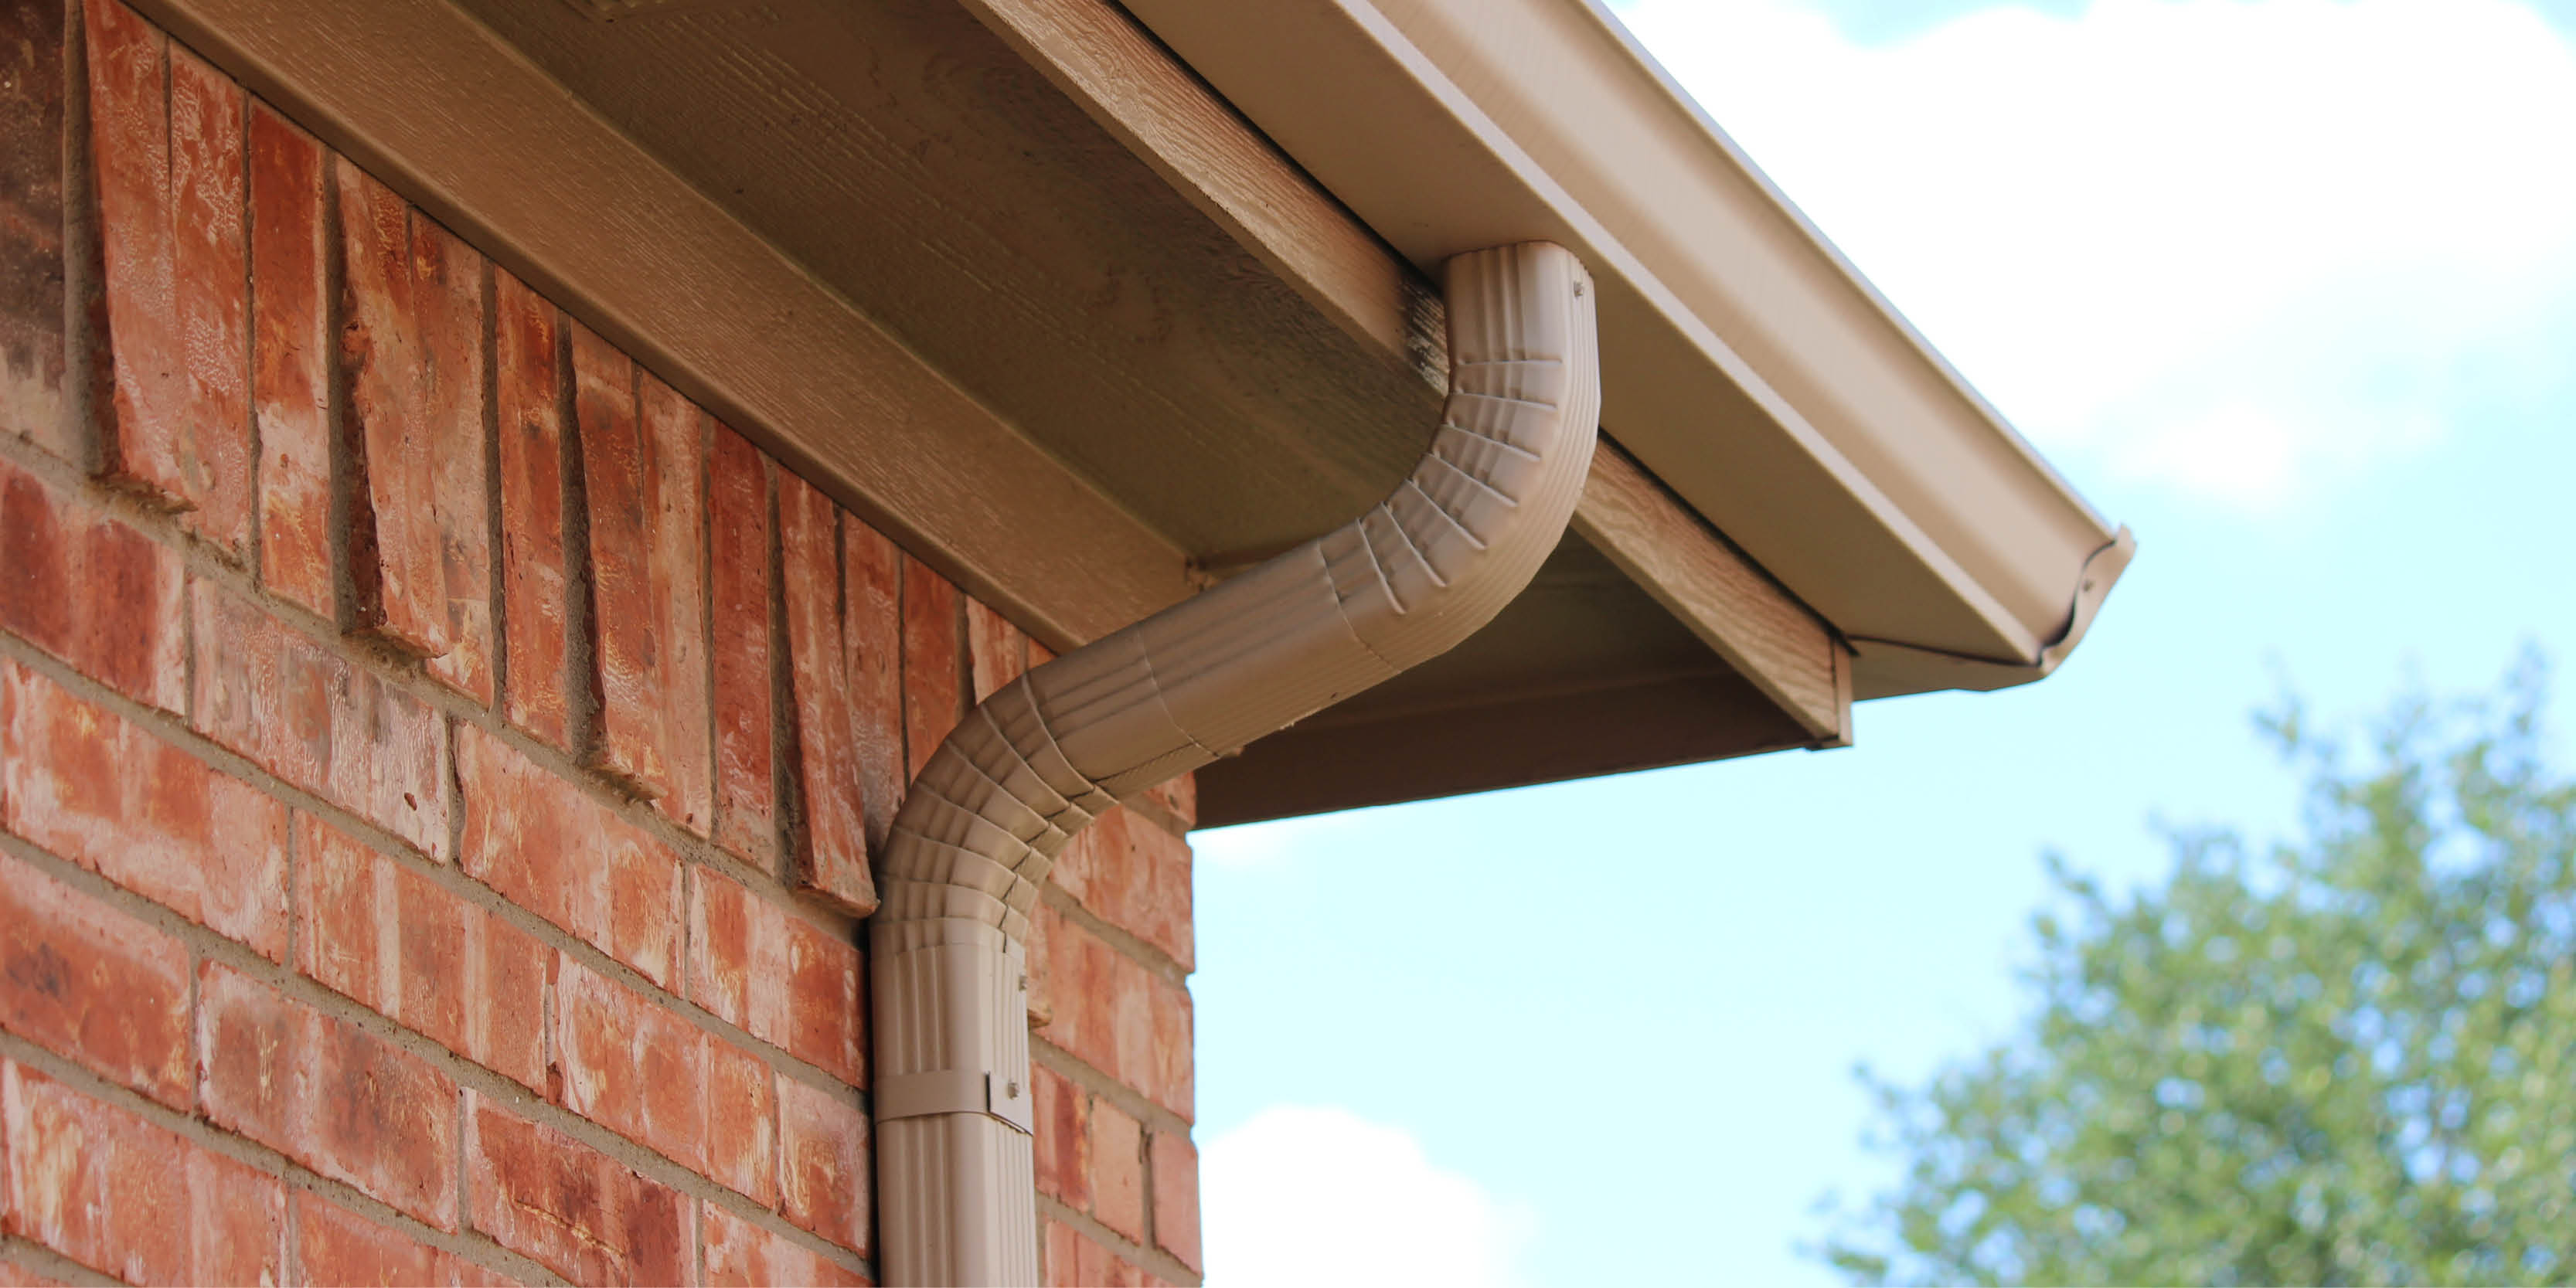 house with gutter downspout